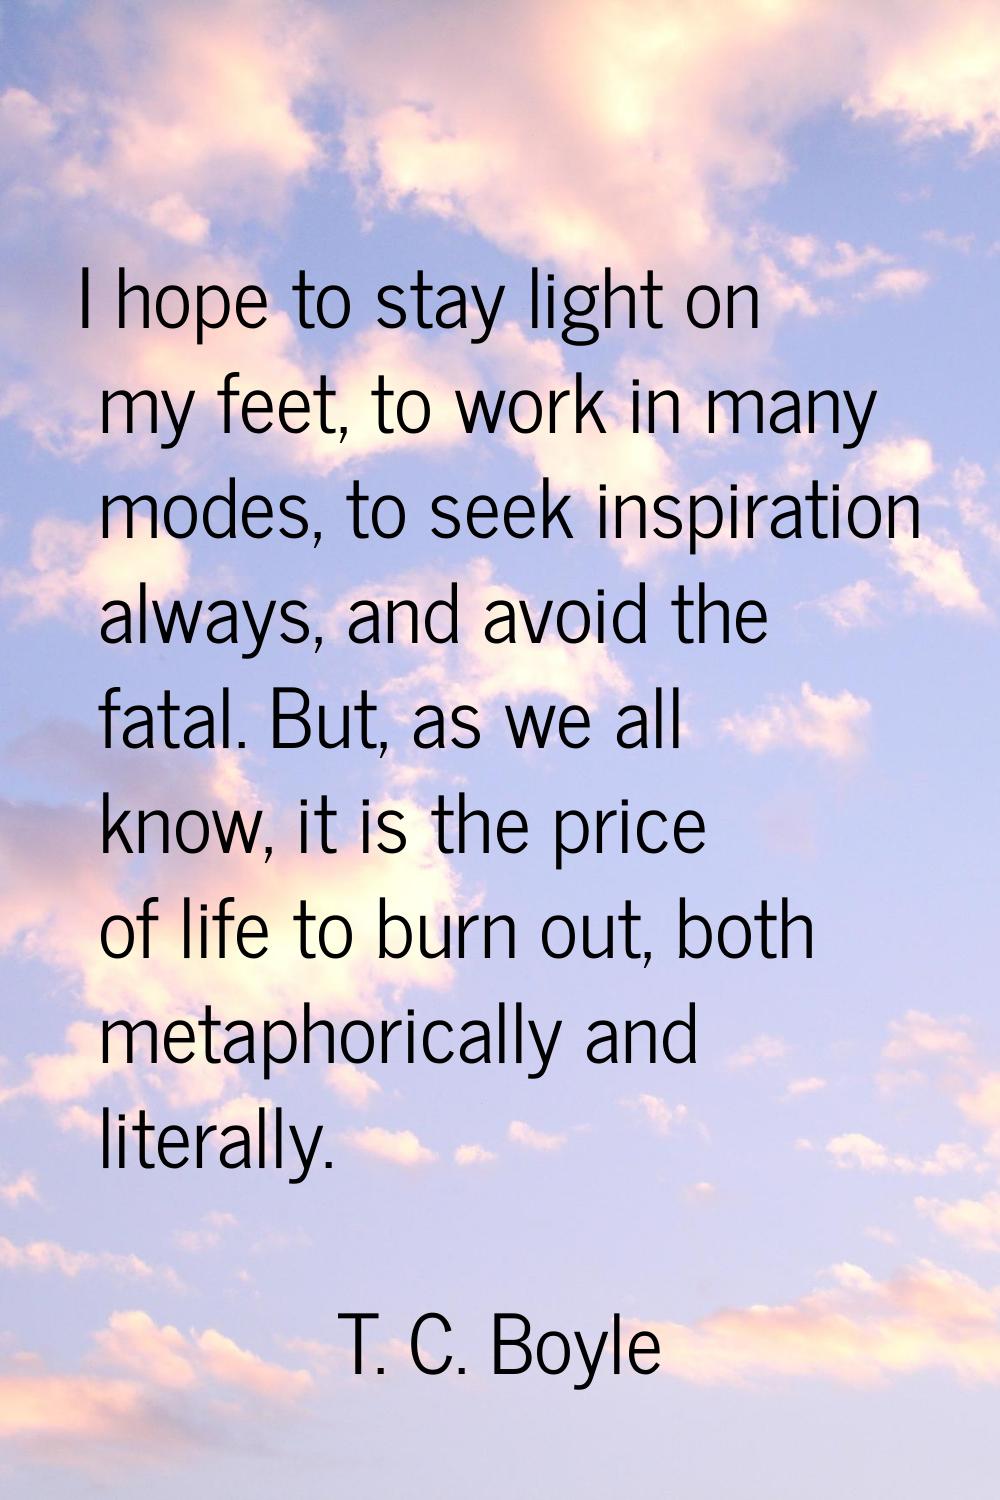 I hope to stay light on my feet, to work in many modes, to seek inspiration always, and avoid the f